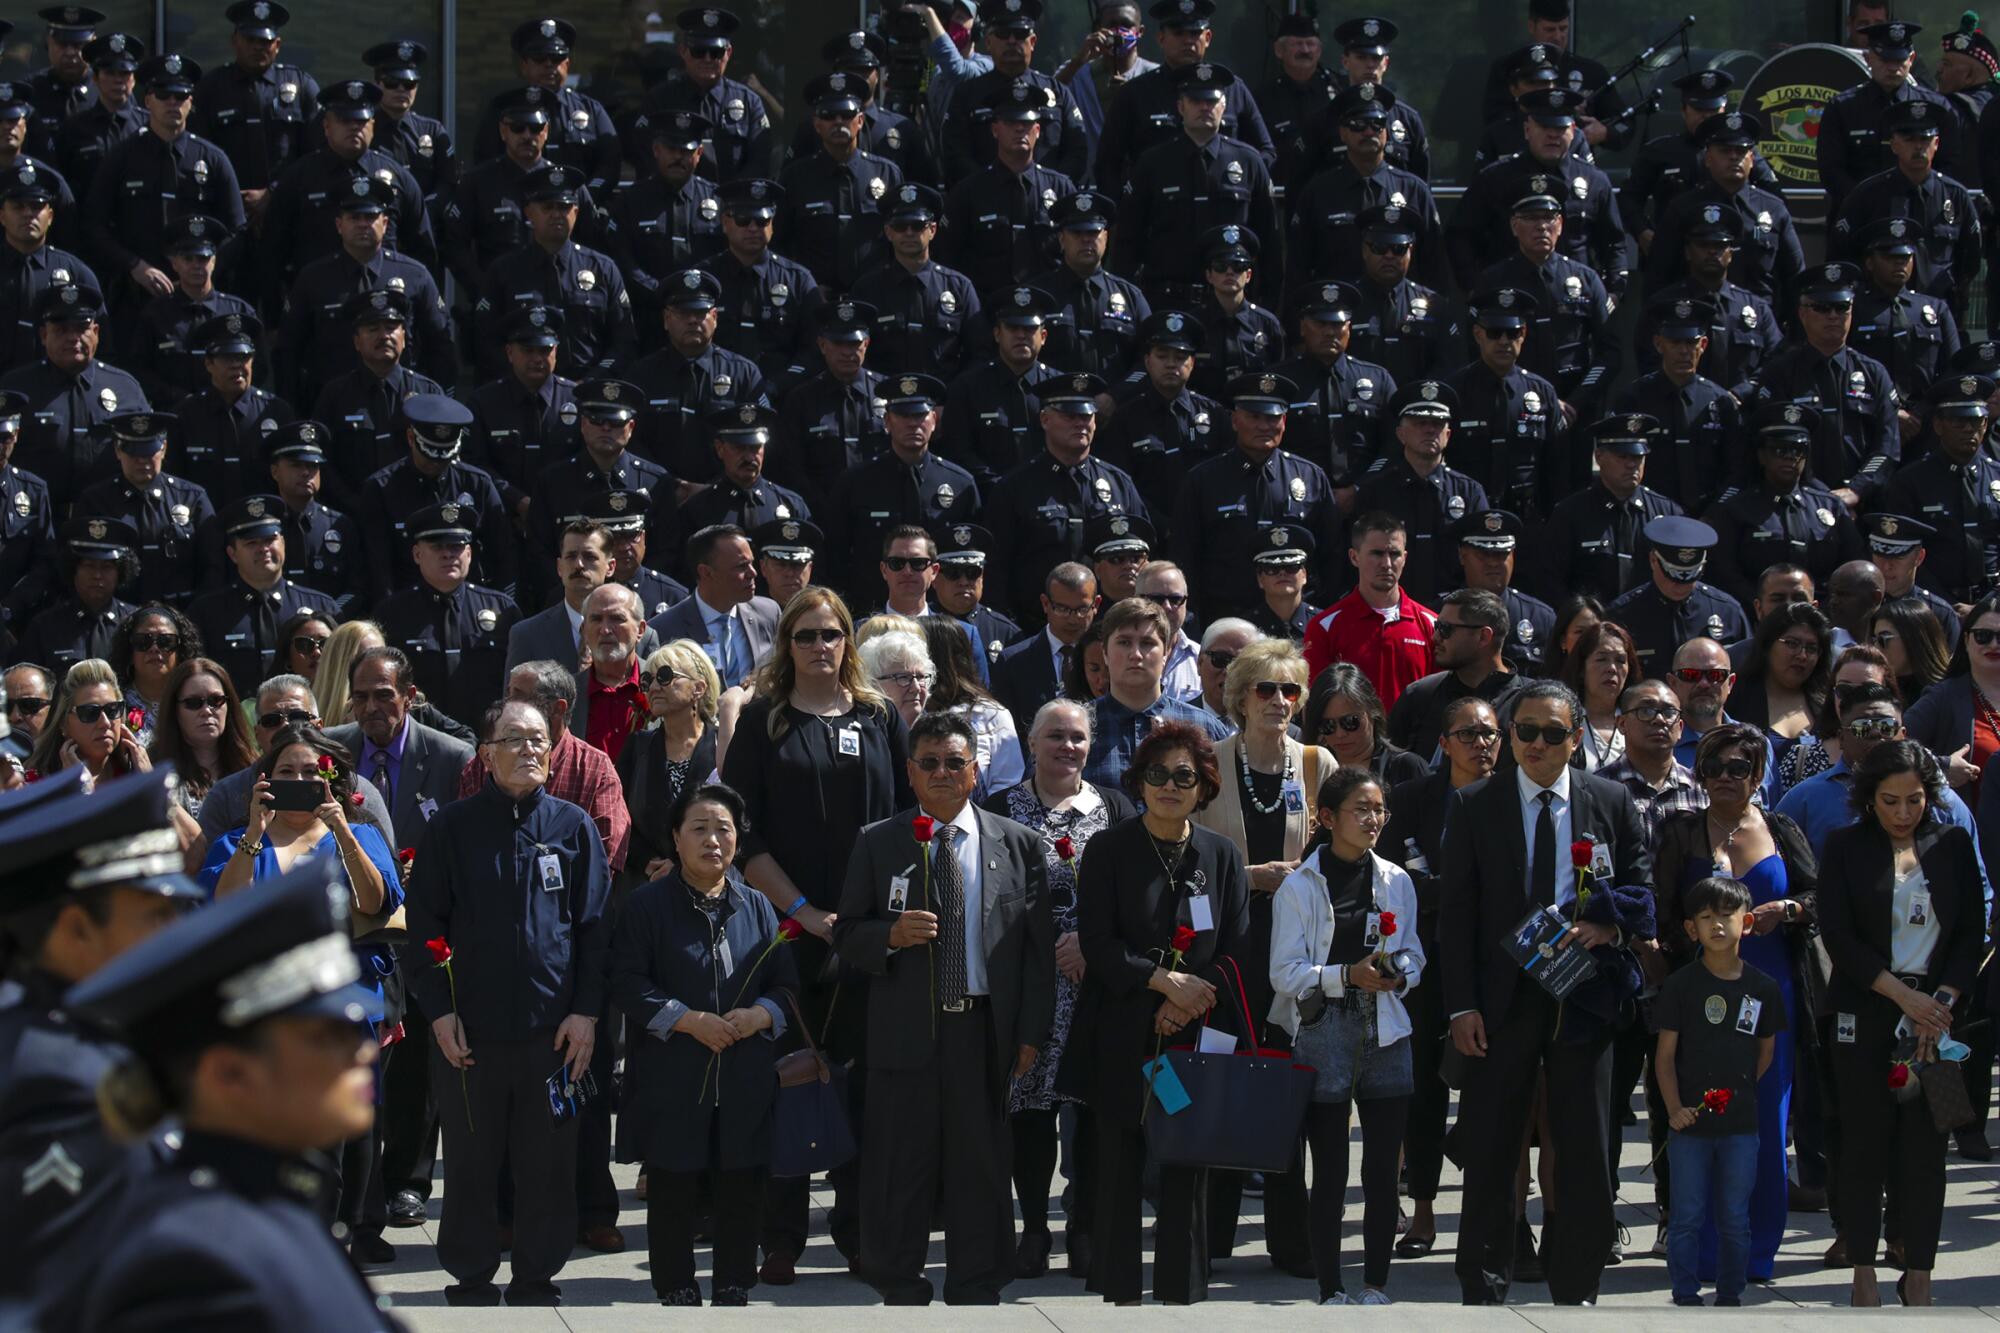 Family members of fallen officers assemble with police officers 